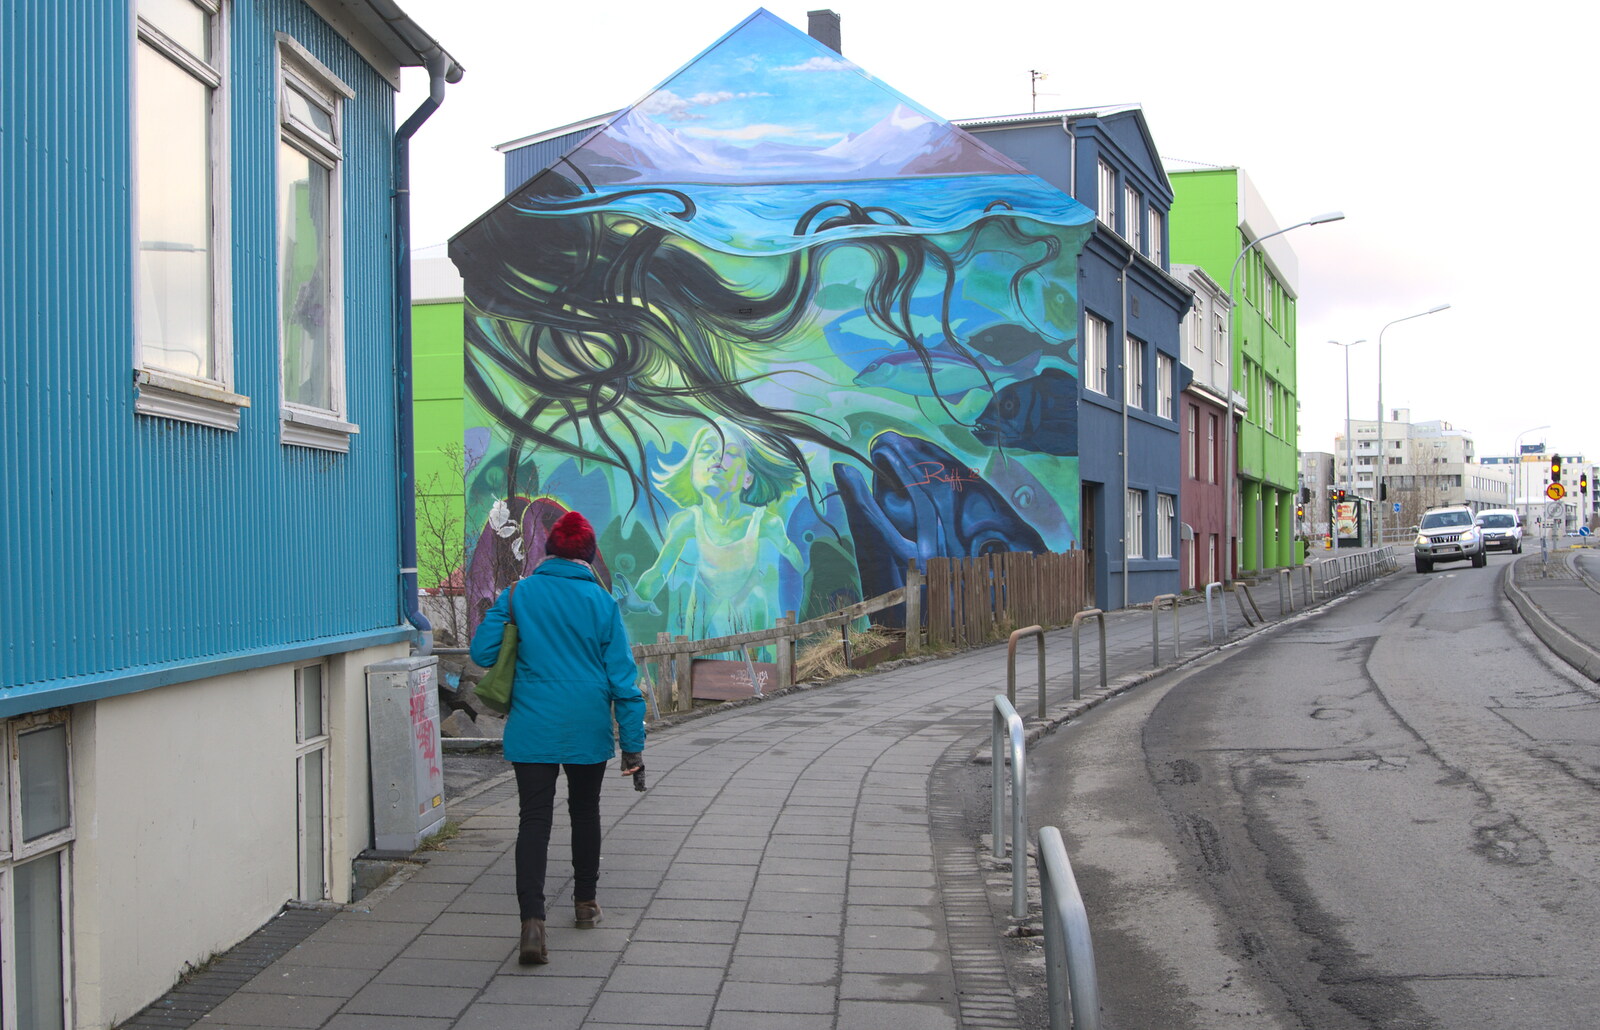 There's a lot of street art in Reykjavik from A Trip to Reykjavik, Iceland - 20th April 2017